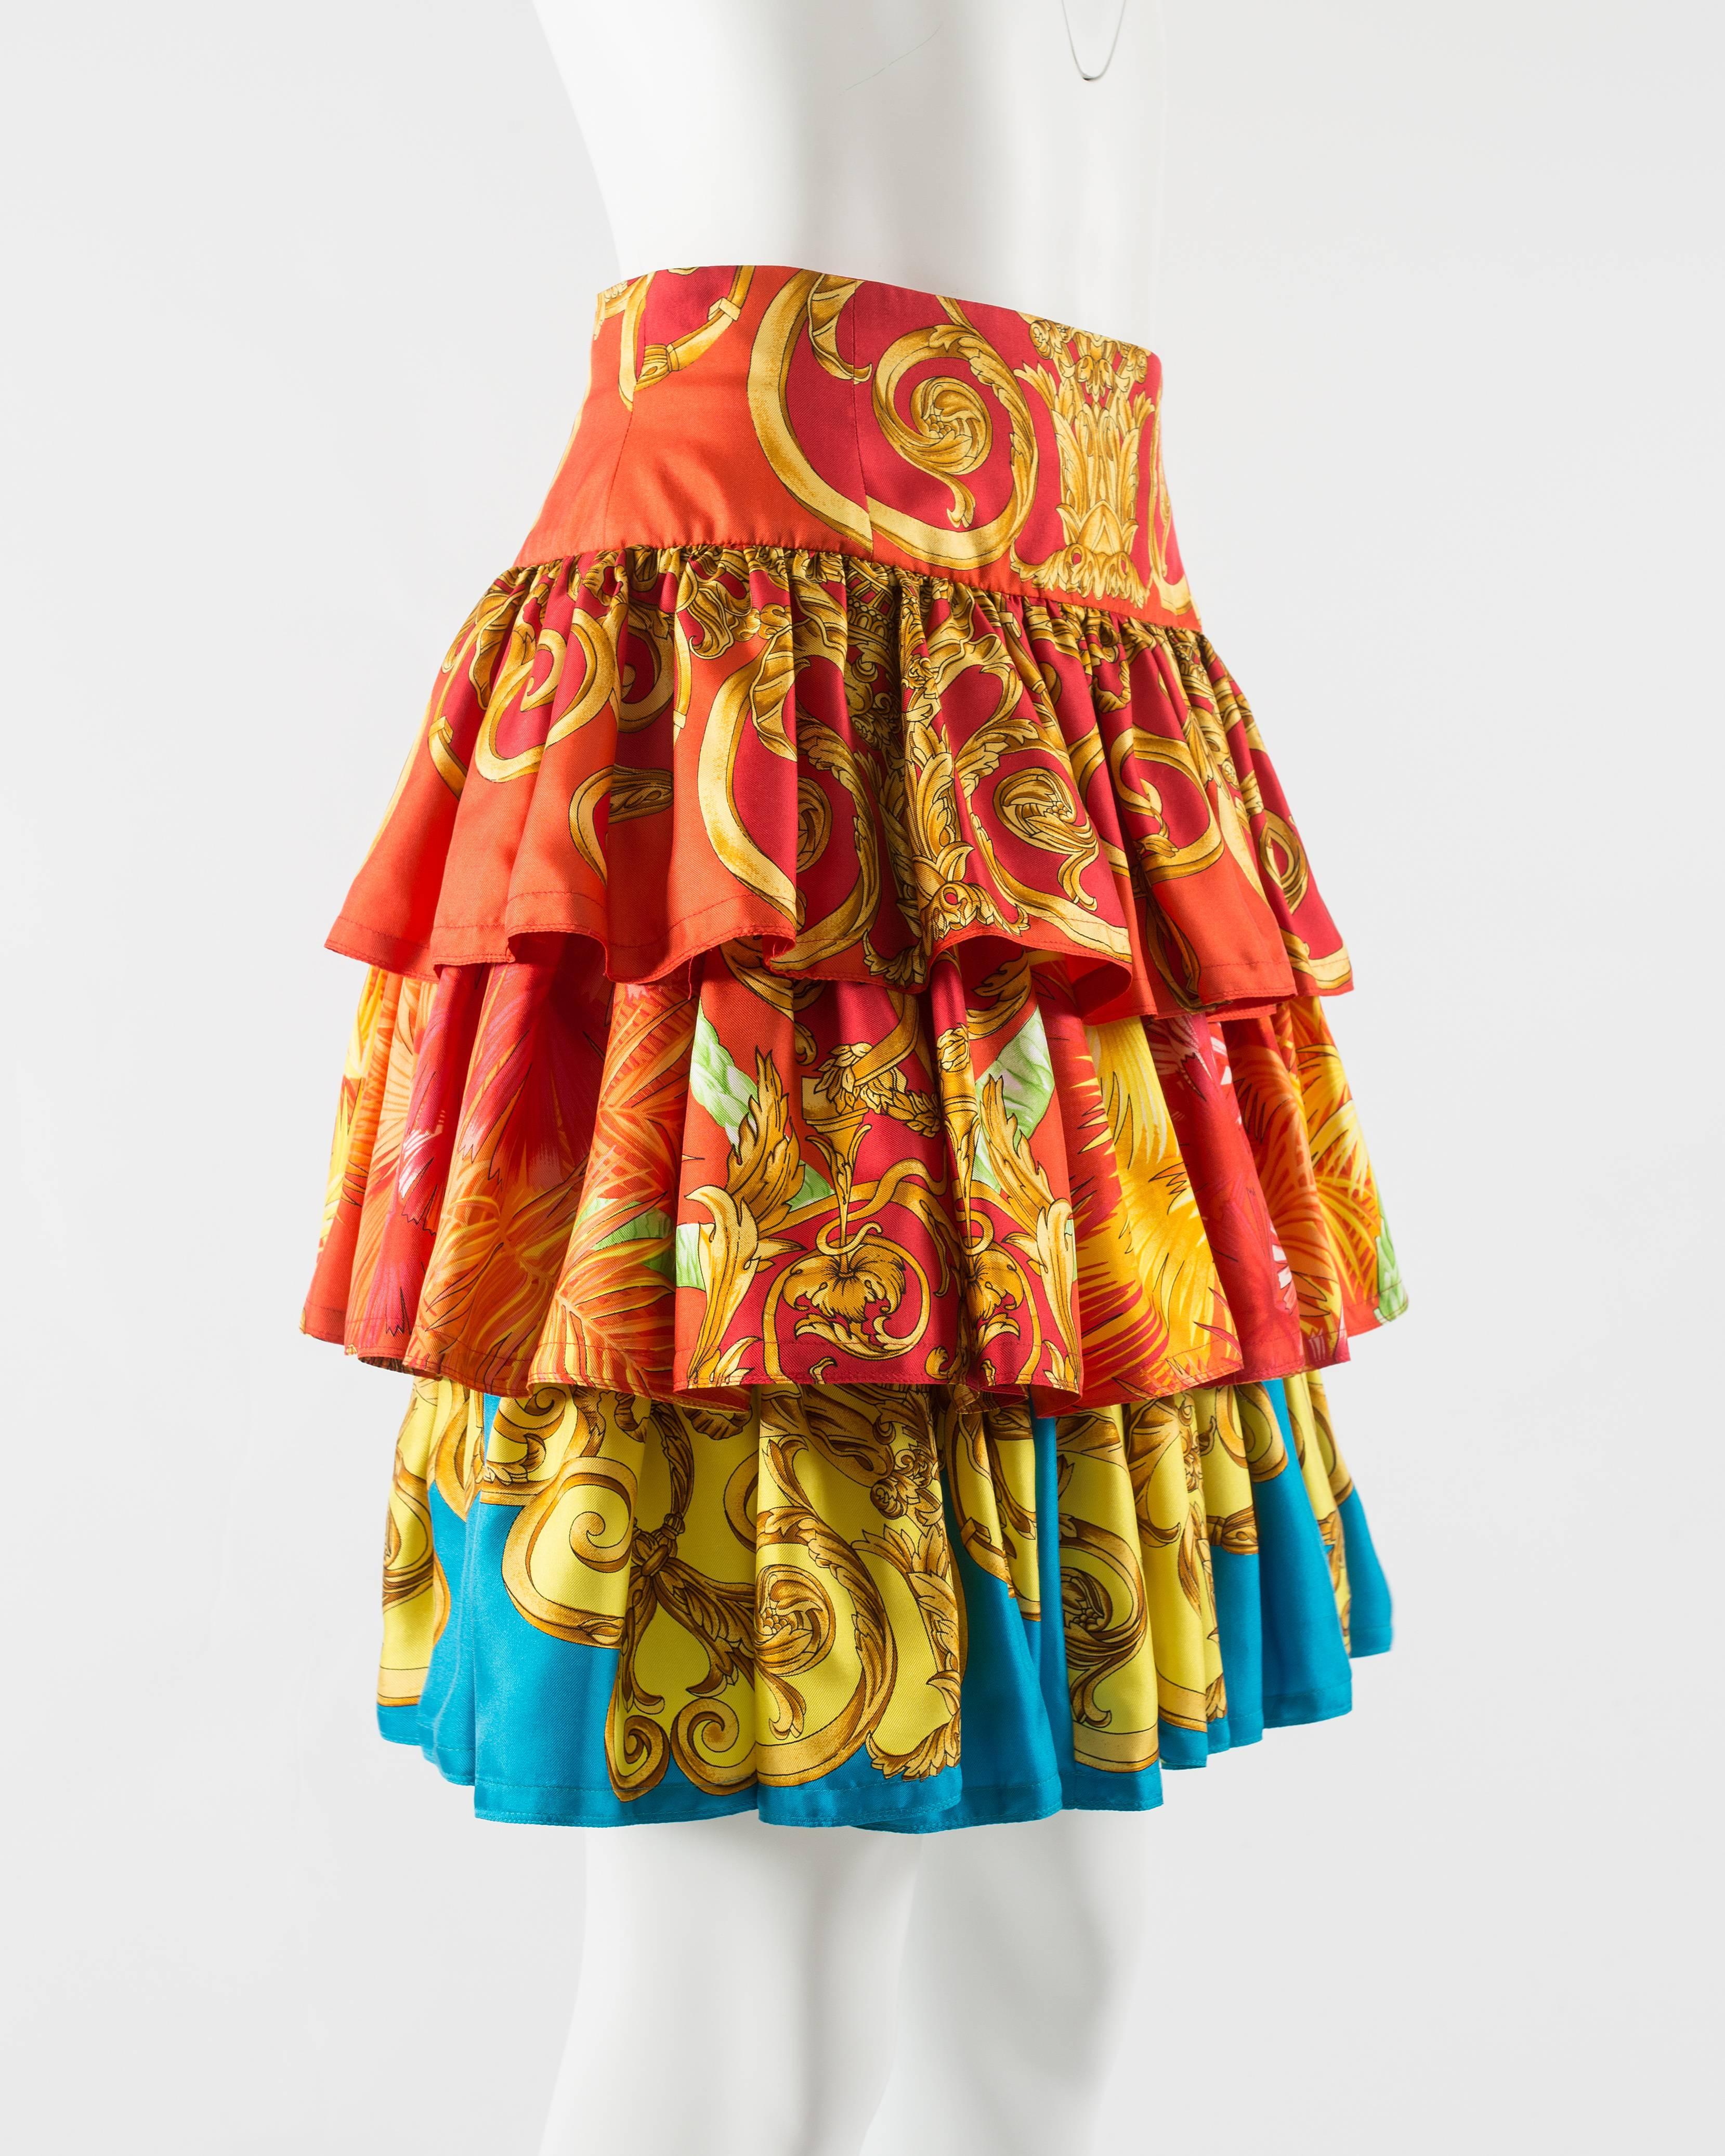 Introducing the exquisite Gianni Versace Baroque printed silk tiered ruffled skirt, a true masterpiece that captures the iconic essence of Versace's bold and opulent style.

Adorned with signature Versace baroque prints in a stunning palette of red,